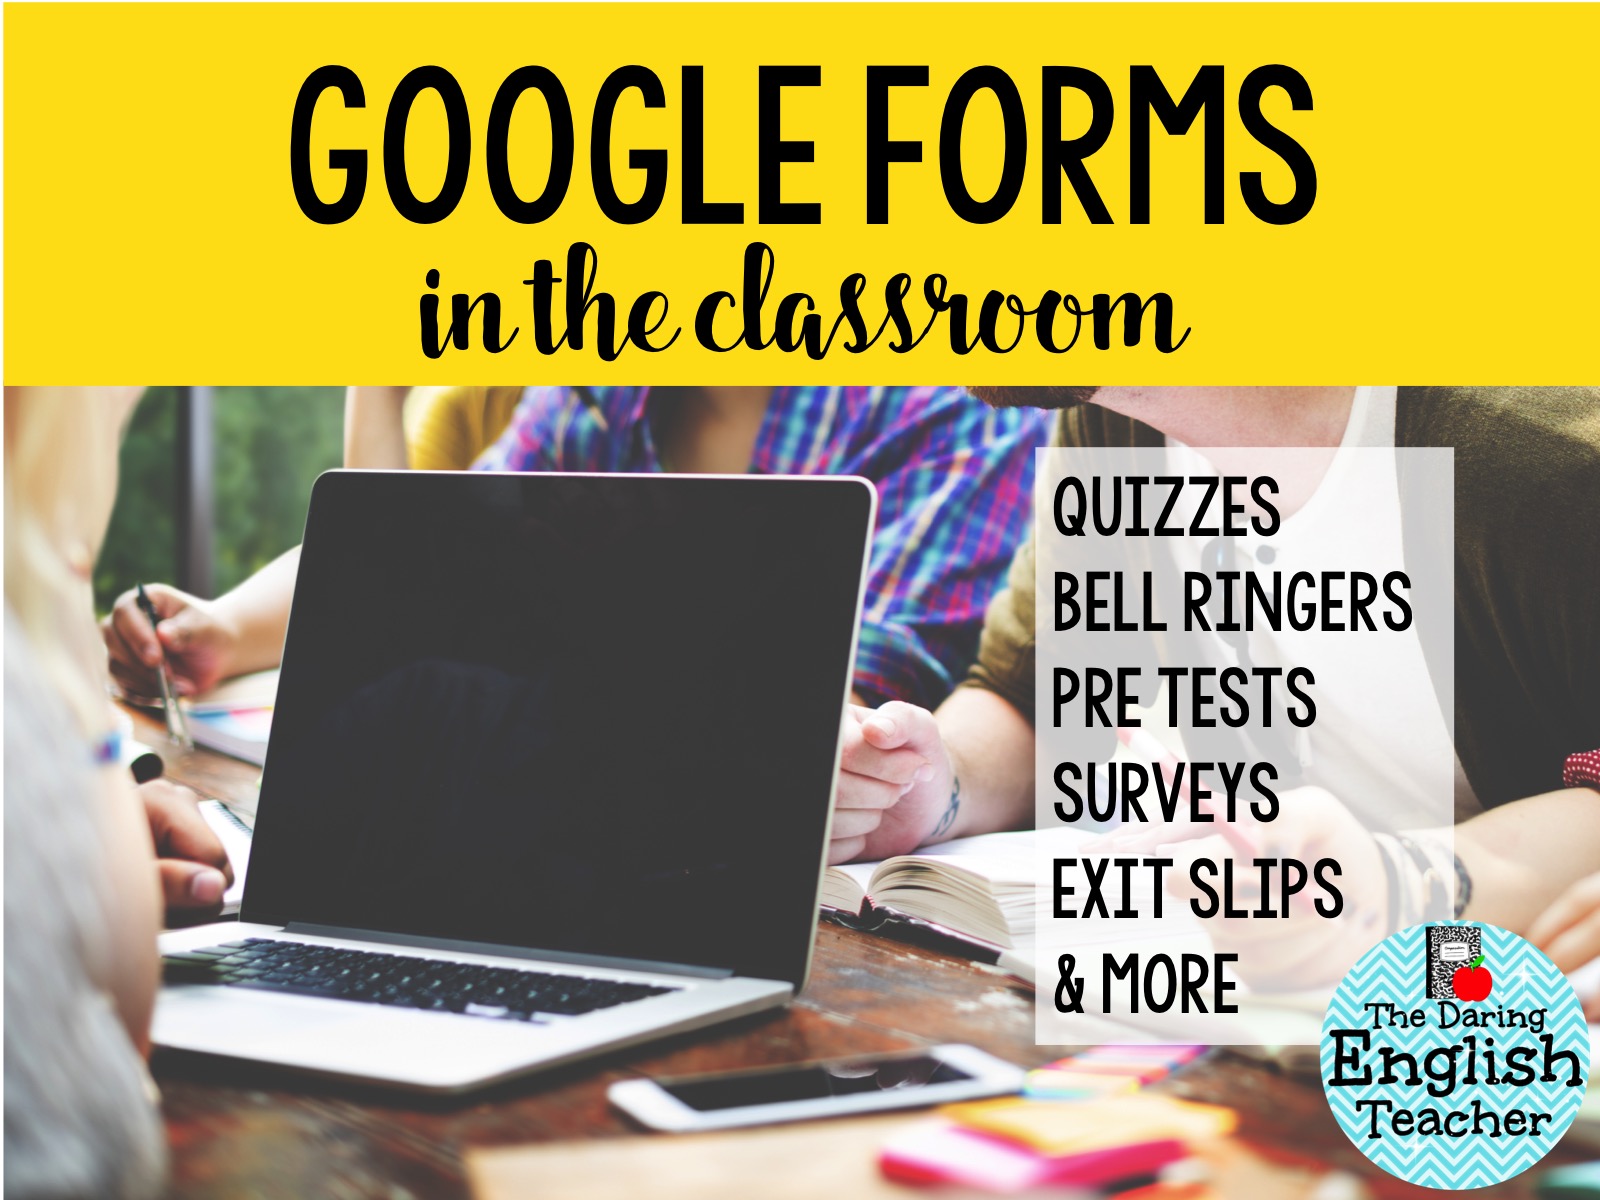 There are many advantages to using Google Forms in your classroom. It's so easy, and the possibilities are endless!